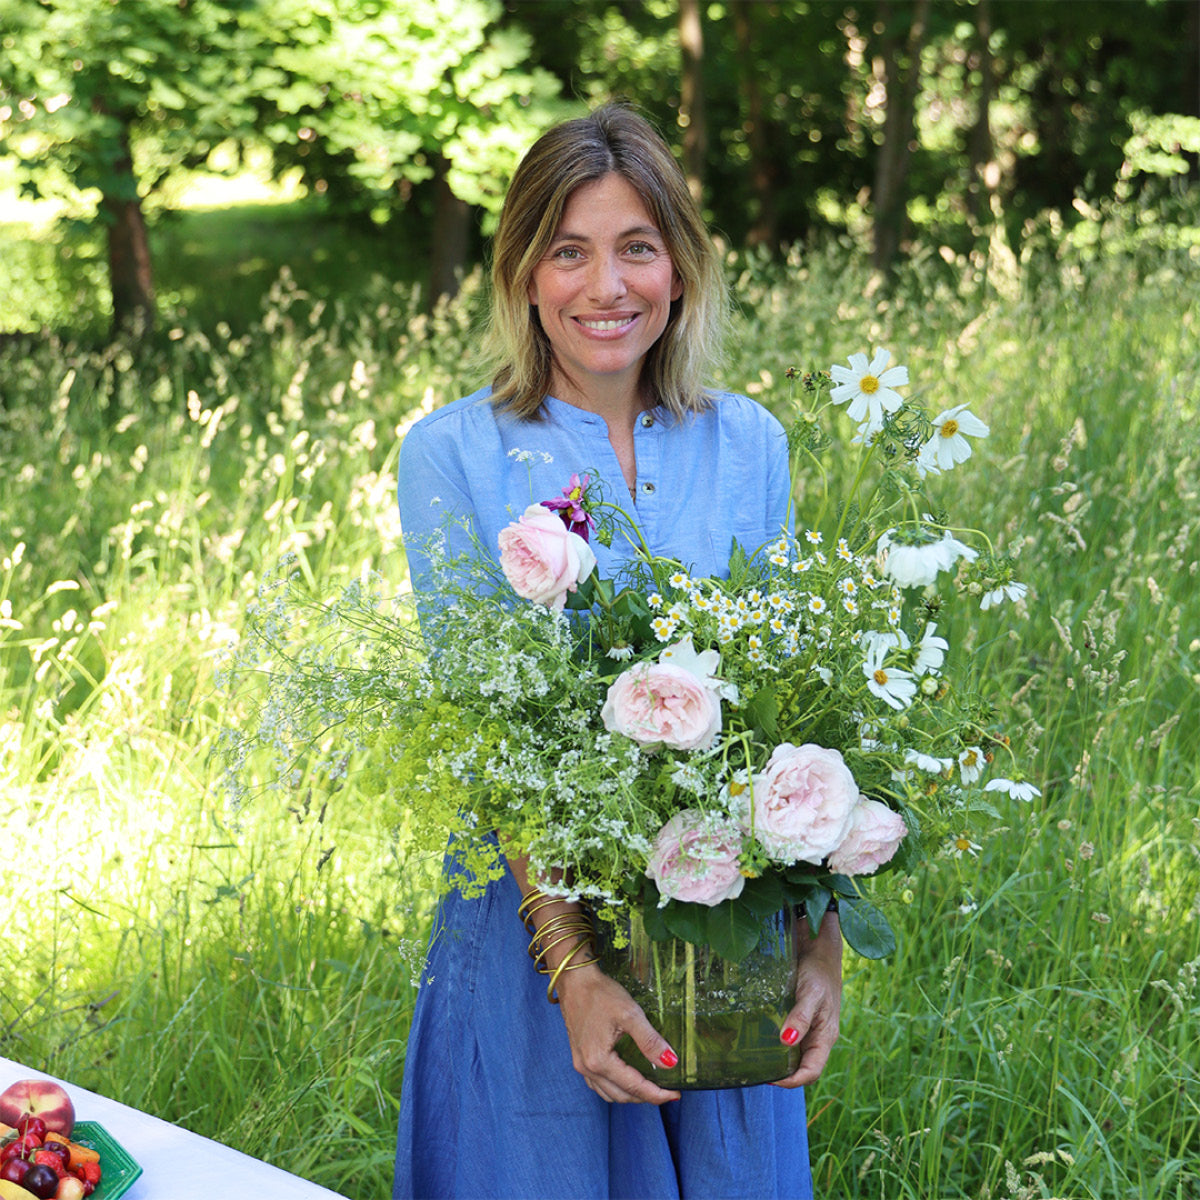 A countryside chat with Élise Dumas, founder of @thePineapplechef